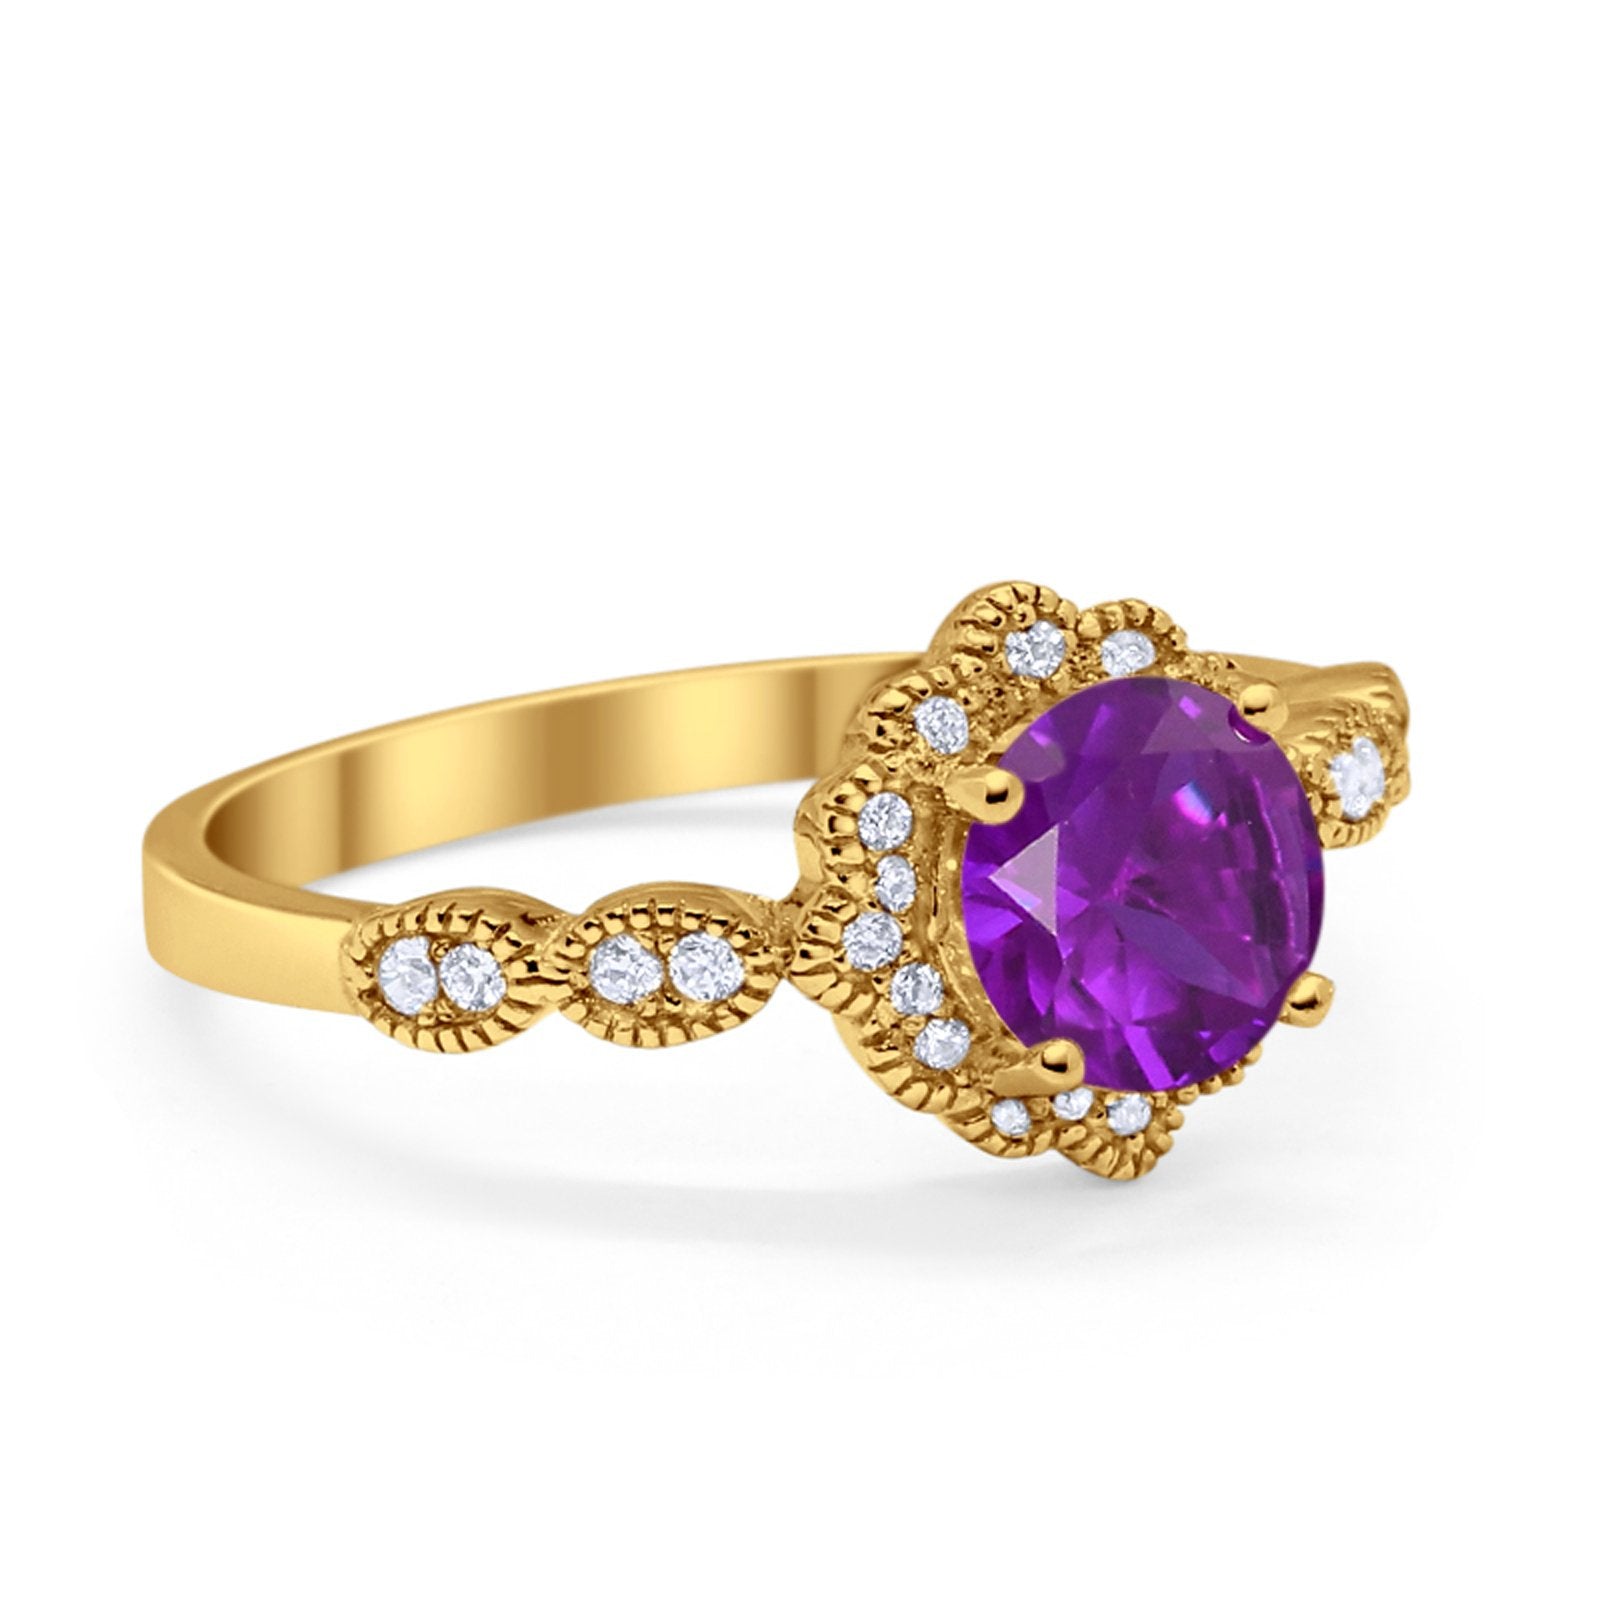 Halo Floral Art Deco Wedding Ring Yellow Tone, Simulated Amethyst CZ 925 Sterling Silver